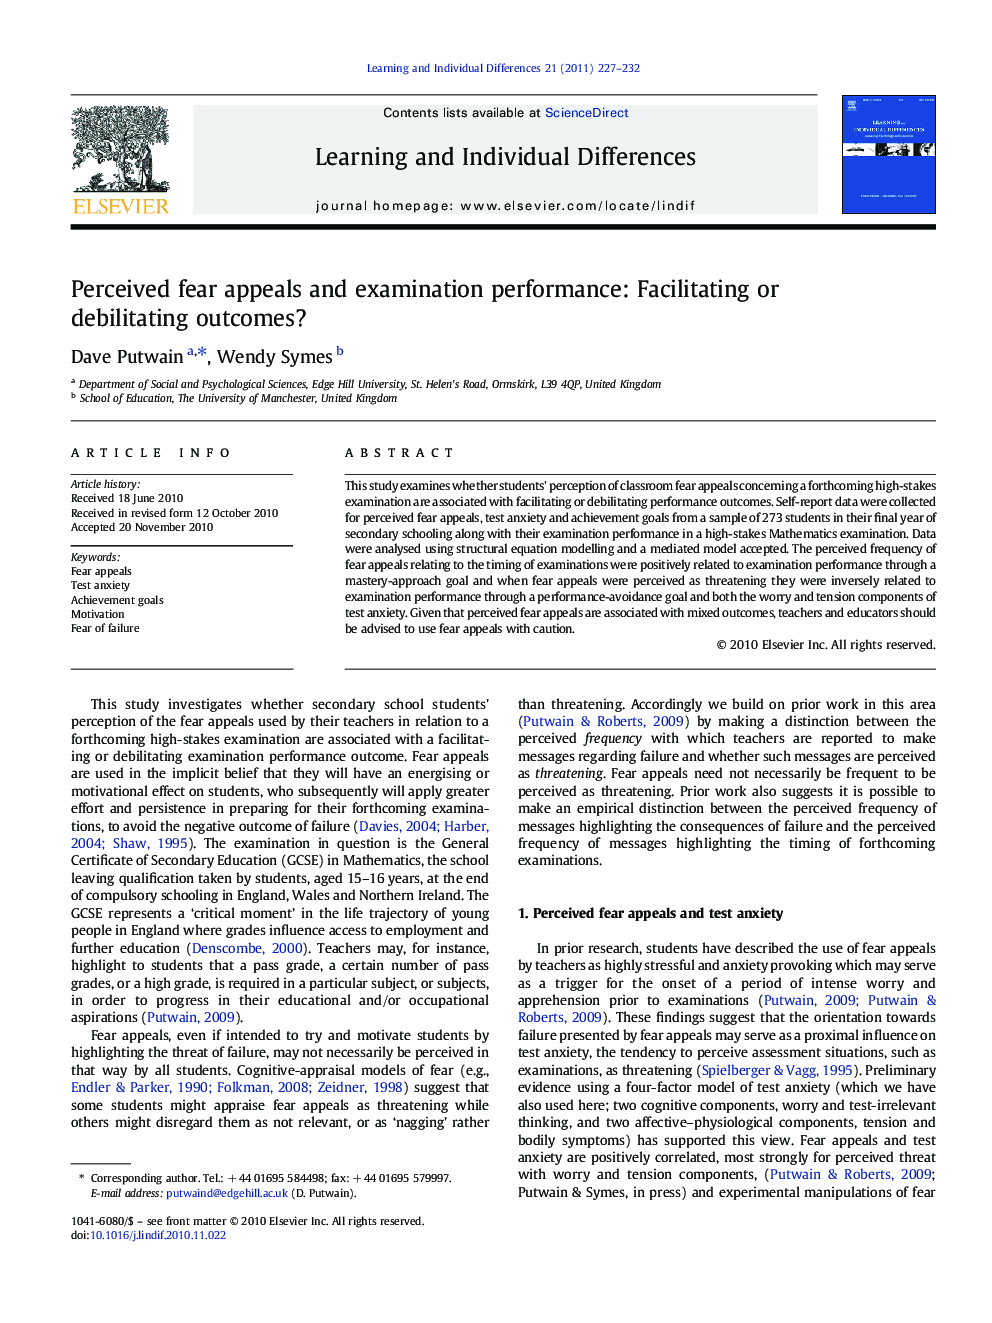 Perceived fear appeals and examination performance: Facilitating or debilitating outcomes?